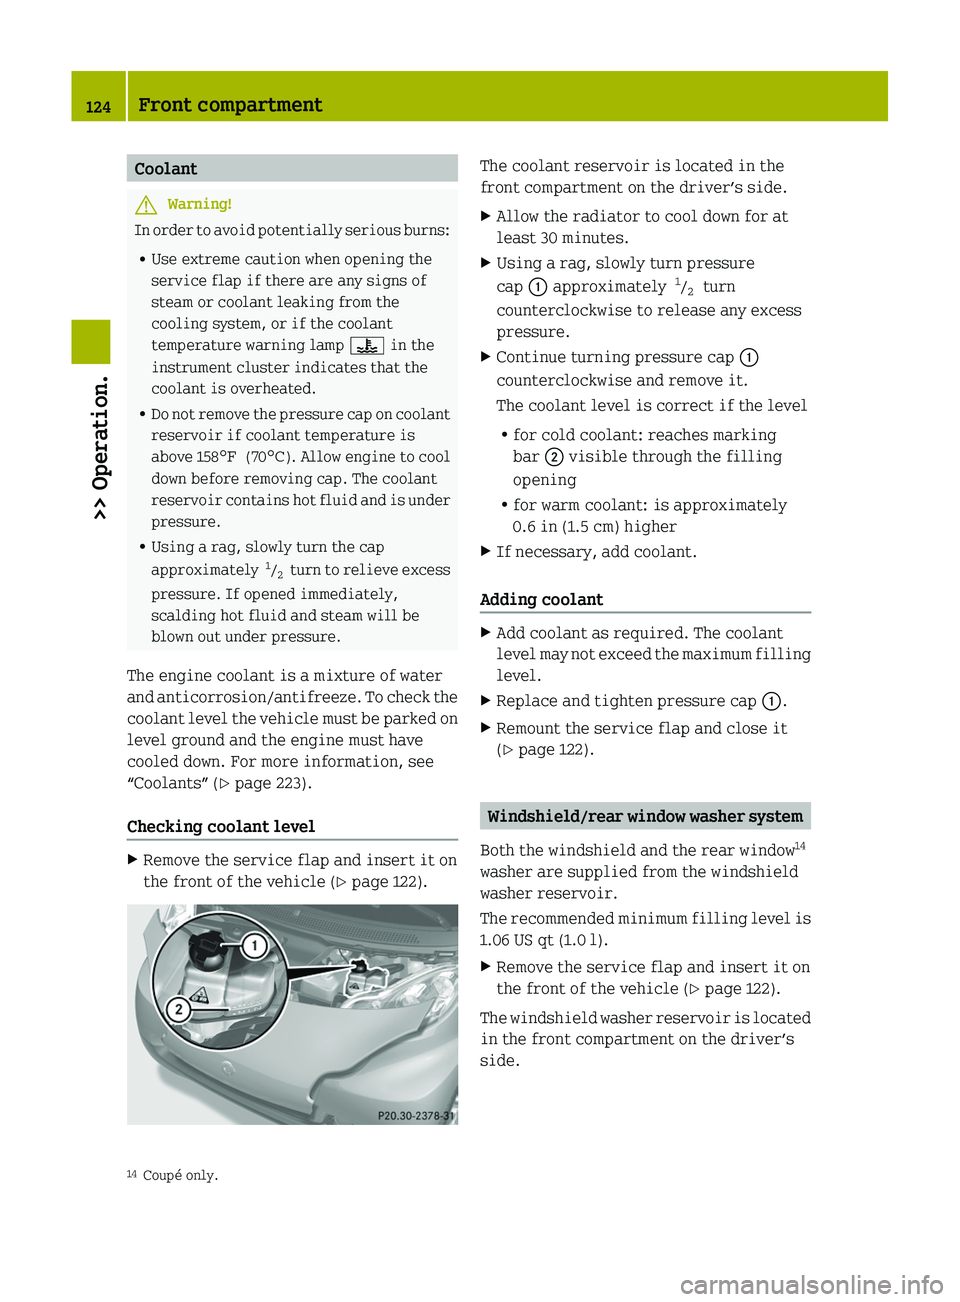 SMART FORTWO COUPE 2011 User Guide CoolantGWarning!
In order to avoid potentially serious burns:
RUse extreme caution when opening the
service flap if there are any signs of
steam or coolant leaking from the
cooling system, or if the c